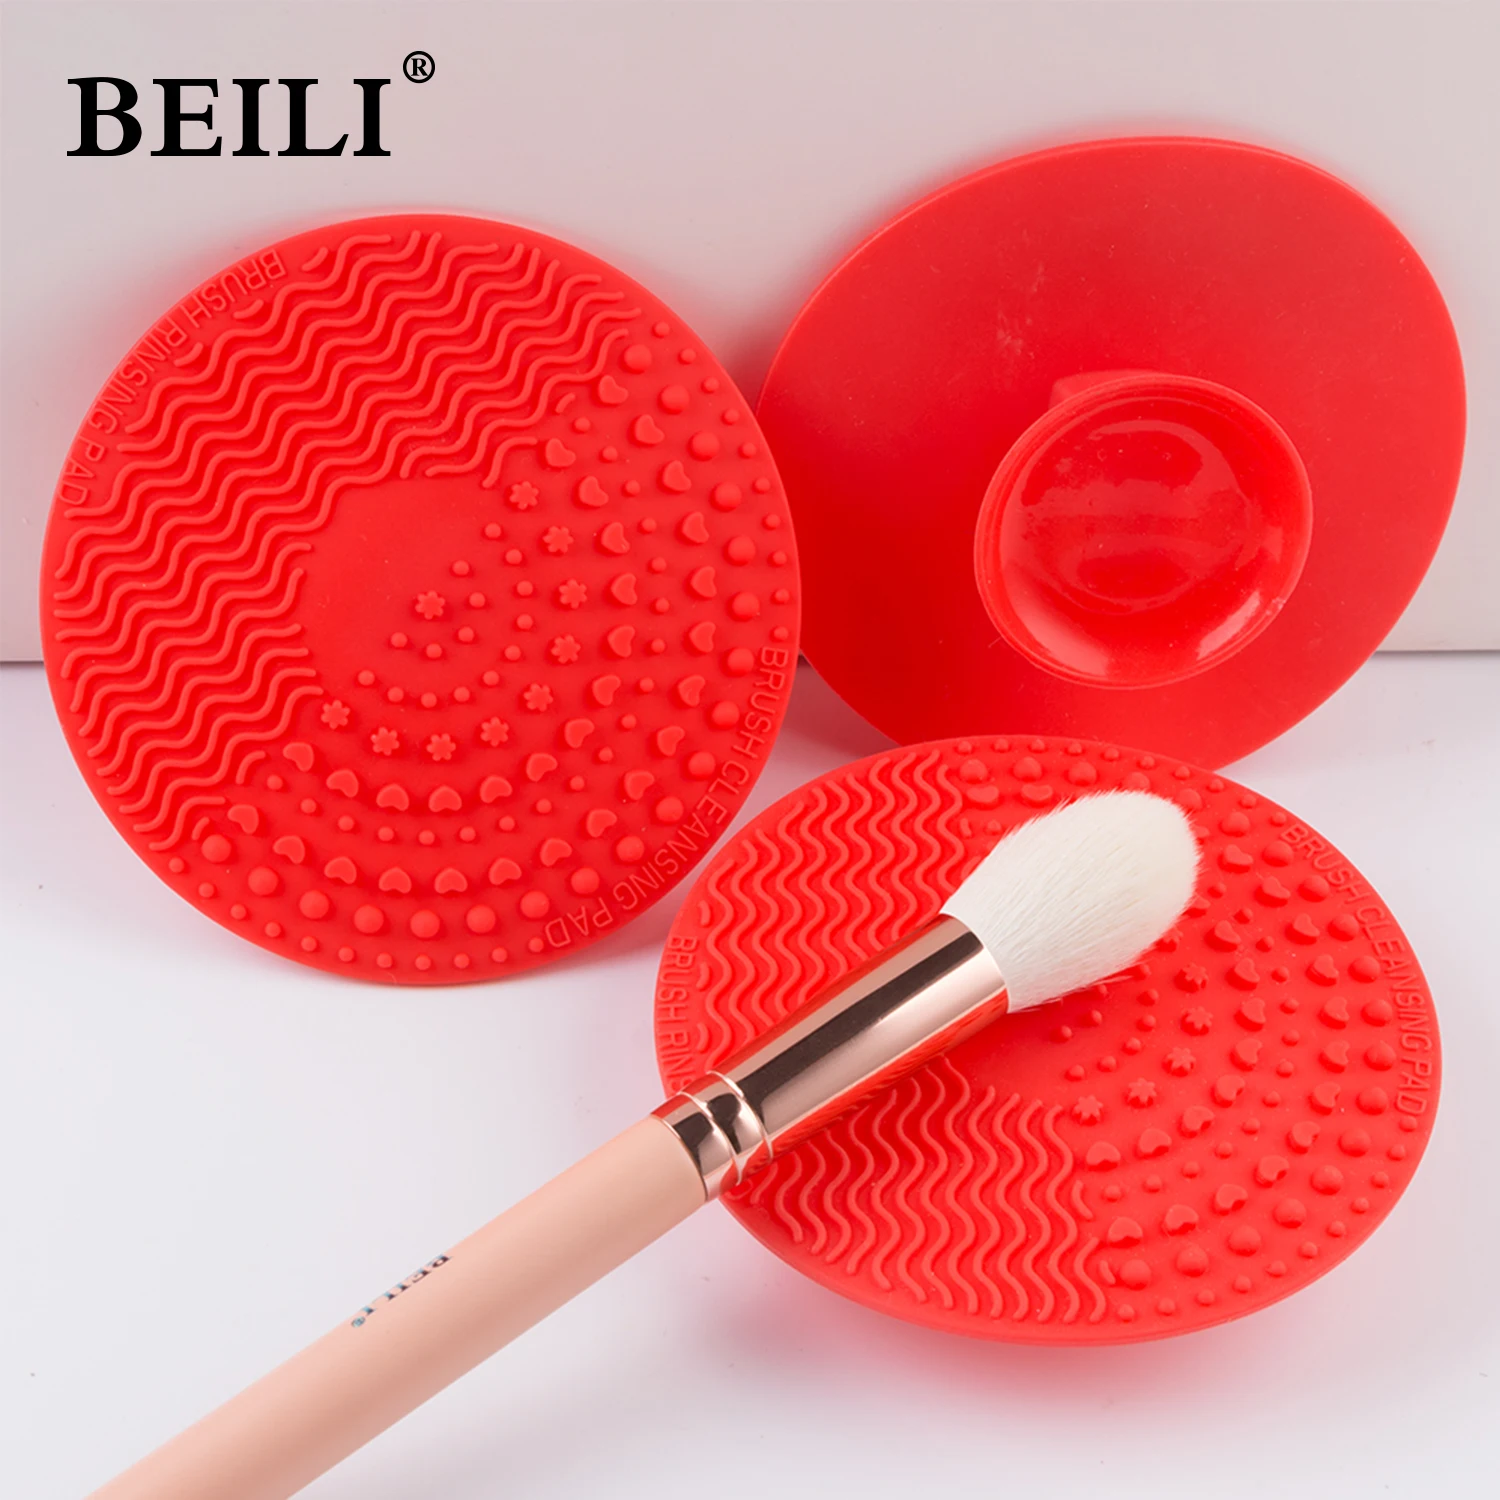 https://ae01.alicdn.com/kf/S259b46e7ac384b51915394e71521f0b1k/BEILI-1-Piece-Red-Silicone-Makeup-Brushes-Cleaner-Pad-Cleaning-Mat-For-Make-Up-Brush-Scrubber.jpg